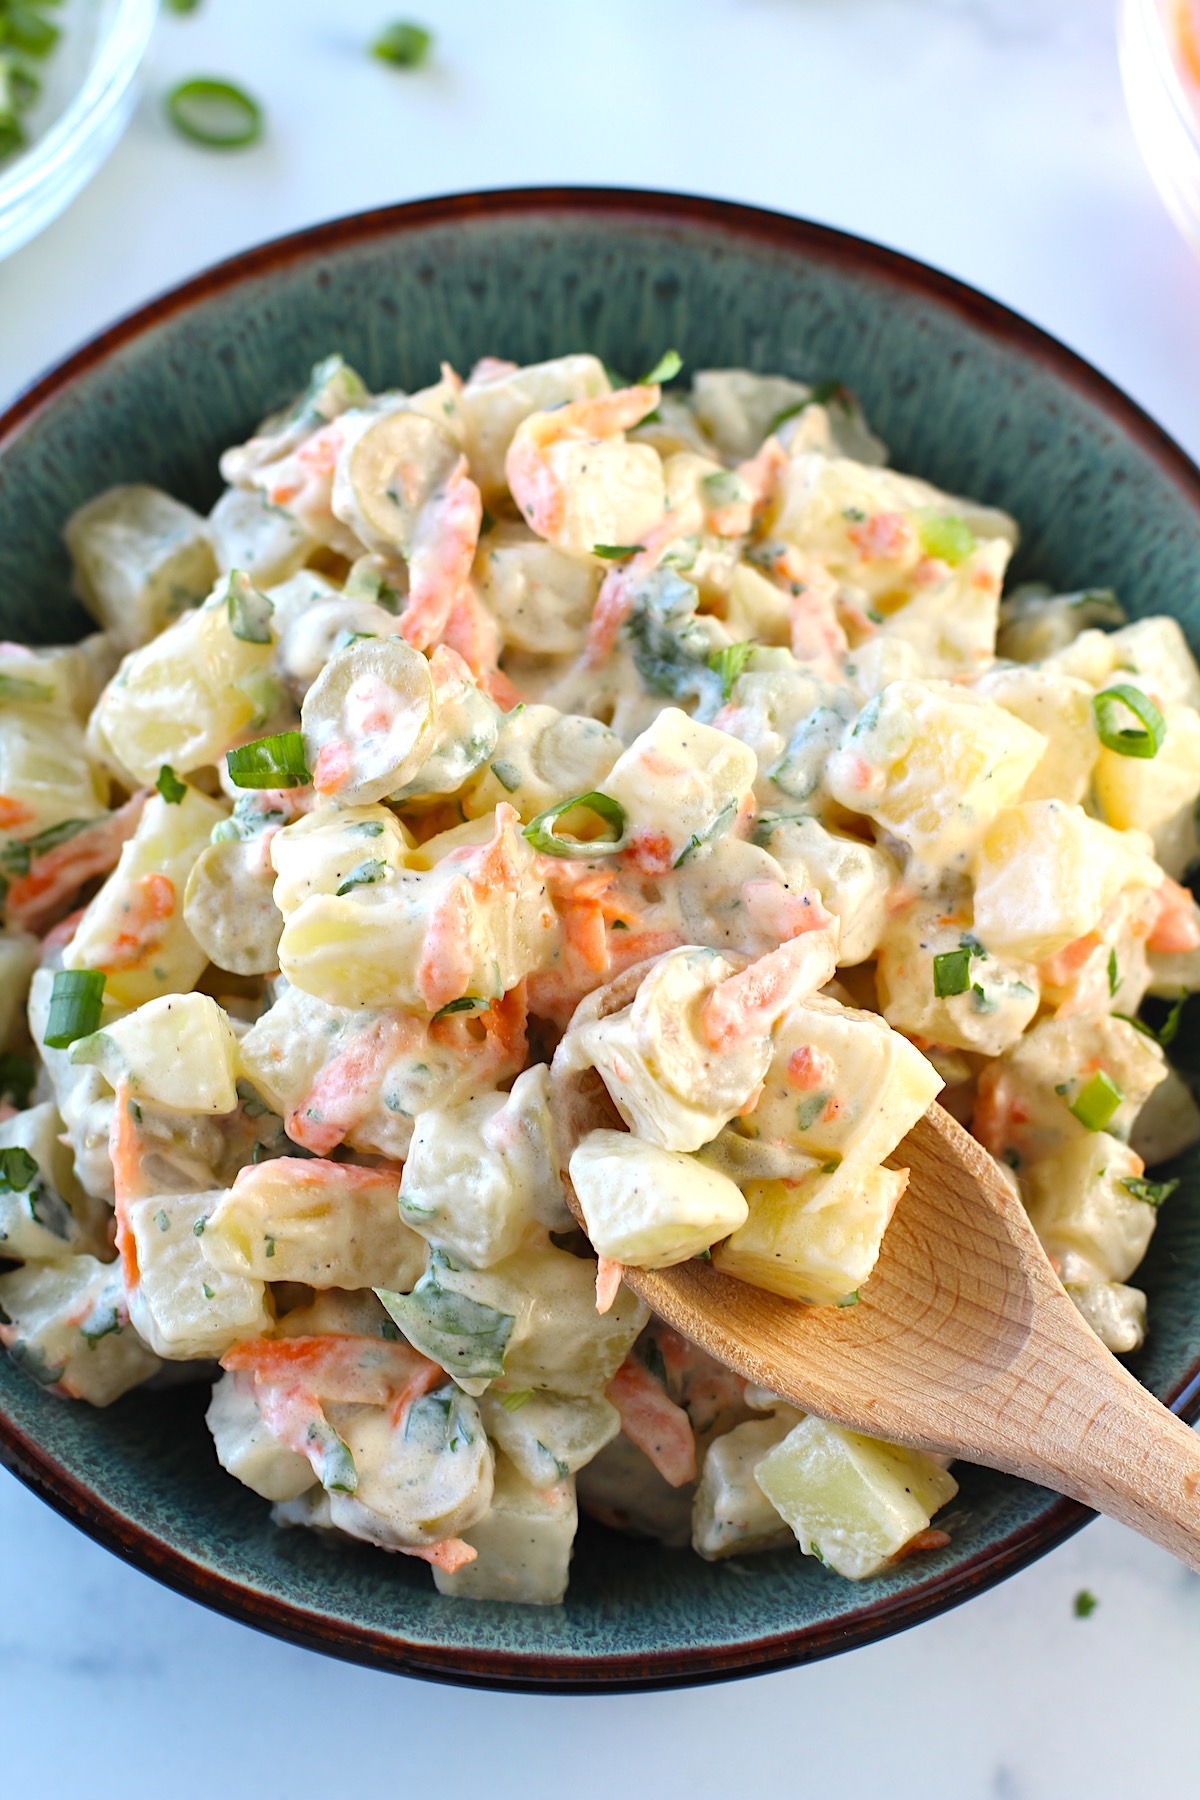 Brazilian Potato Salad in a bowl with carrots, green olives, and a mayonnaise dressing, with bamboo spoon scooping some up and cilantro garnish on top.